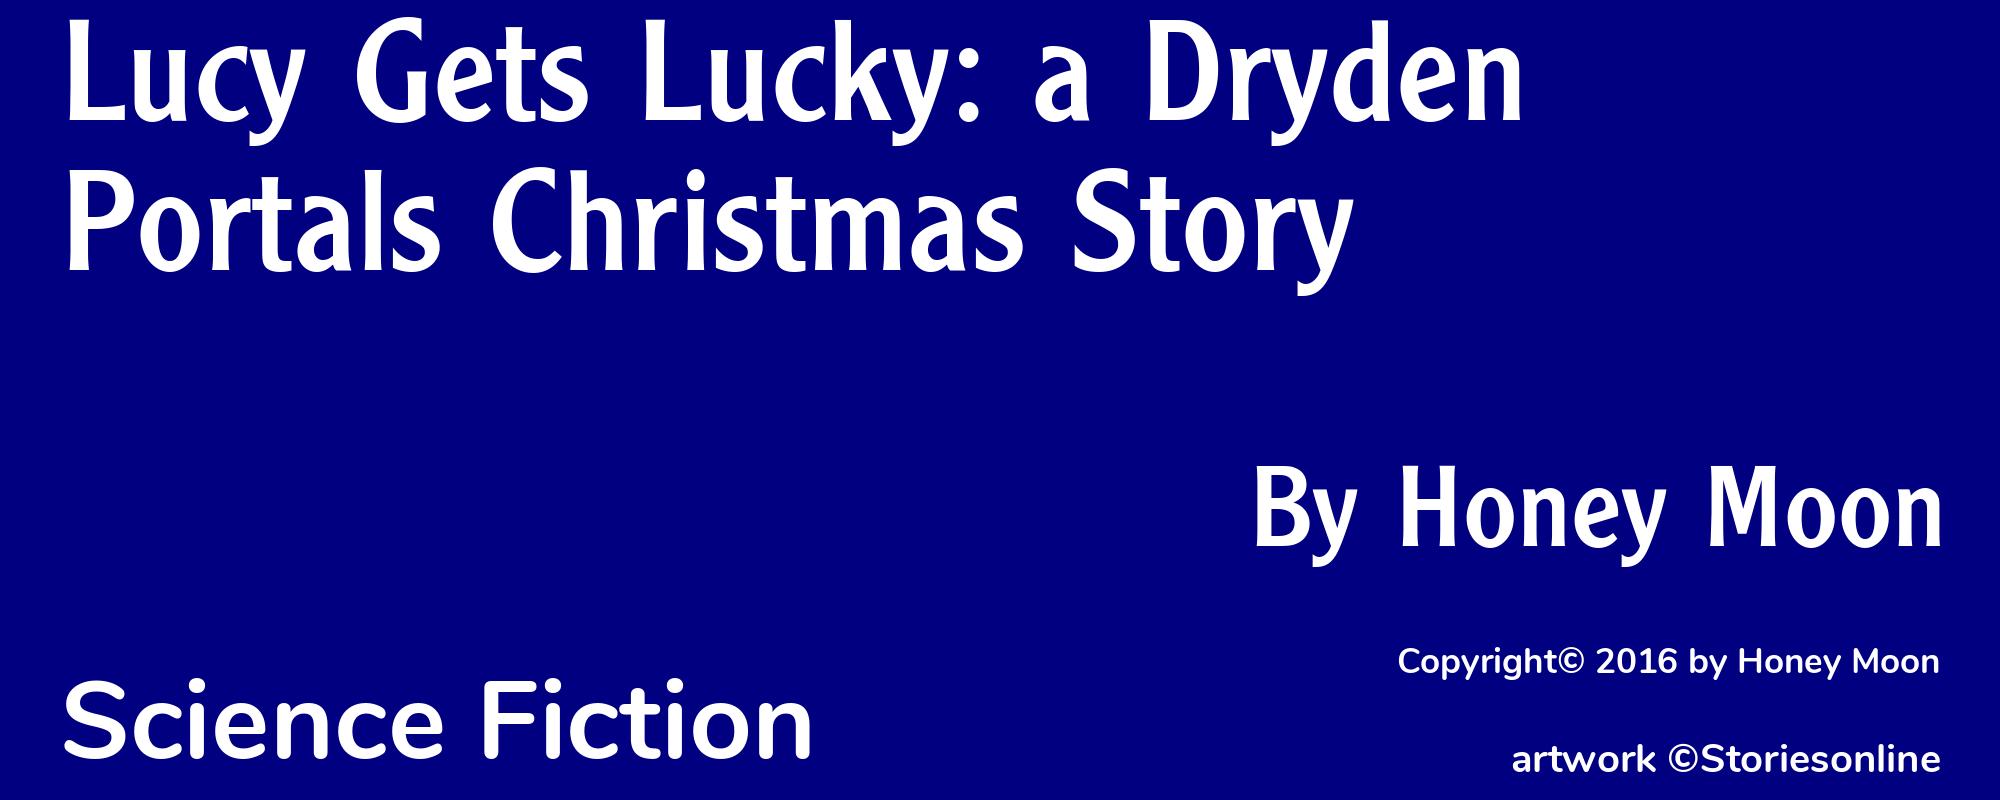 Lucy Gets Lucky: a Dryden Portals Christmas Story - Cover